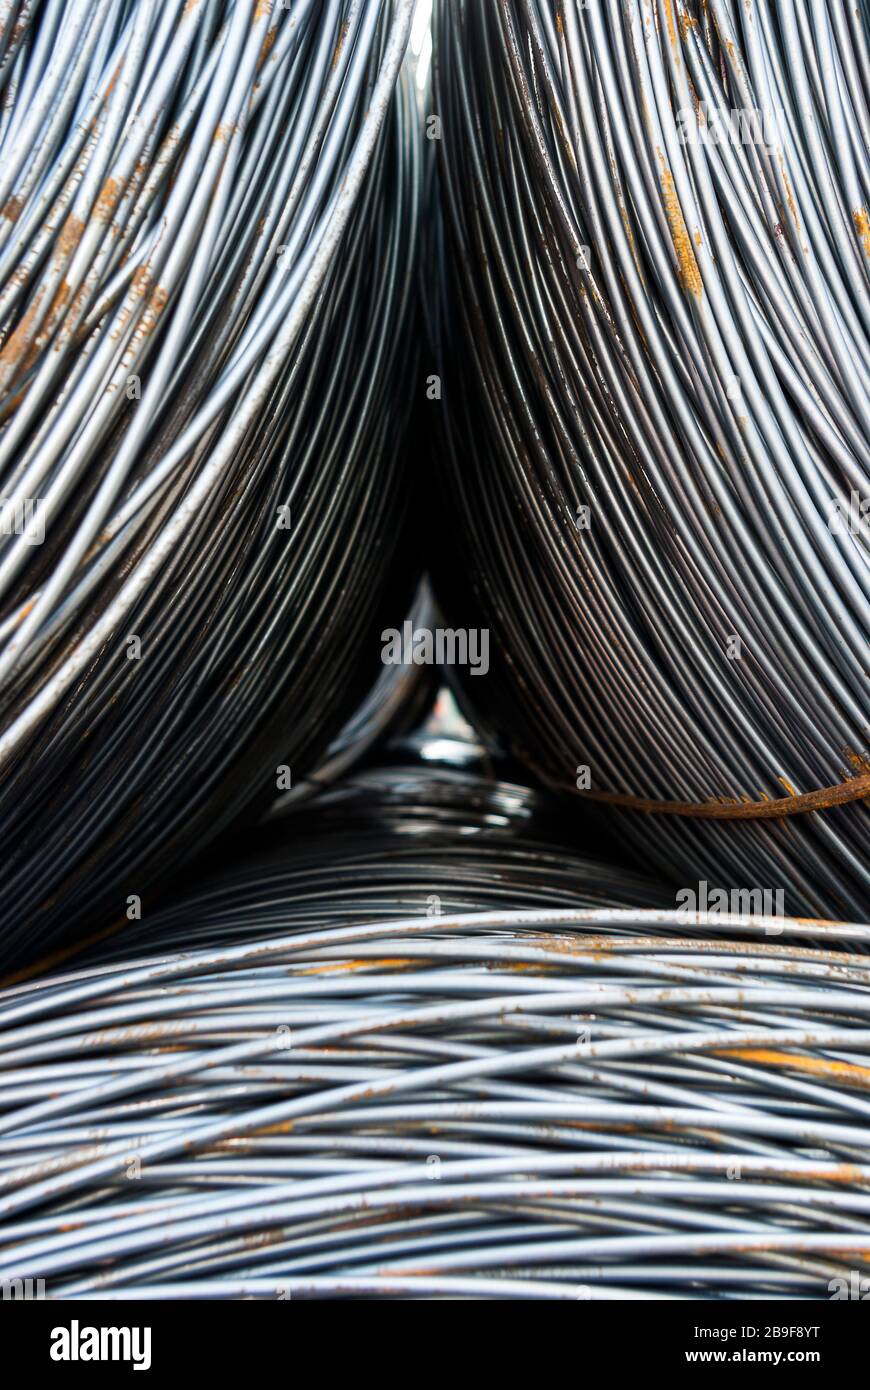 Round steel in rings in the material bearing several rings stacked, selective focus, Rundstahl in Ringen im Materiallager mehrere Ringe gestapelt, sel Stock Photo